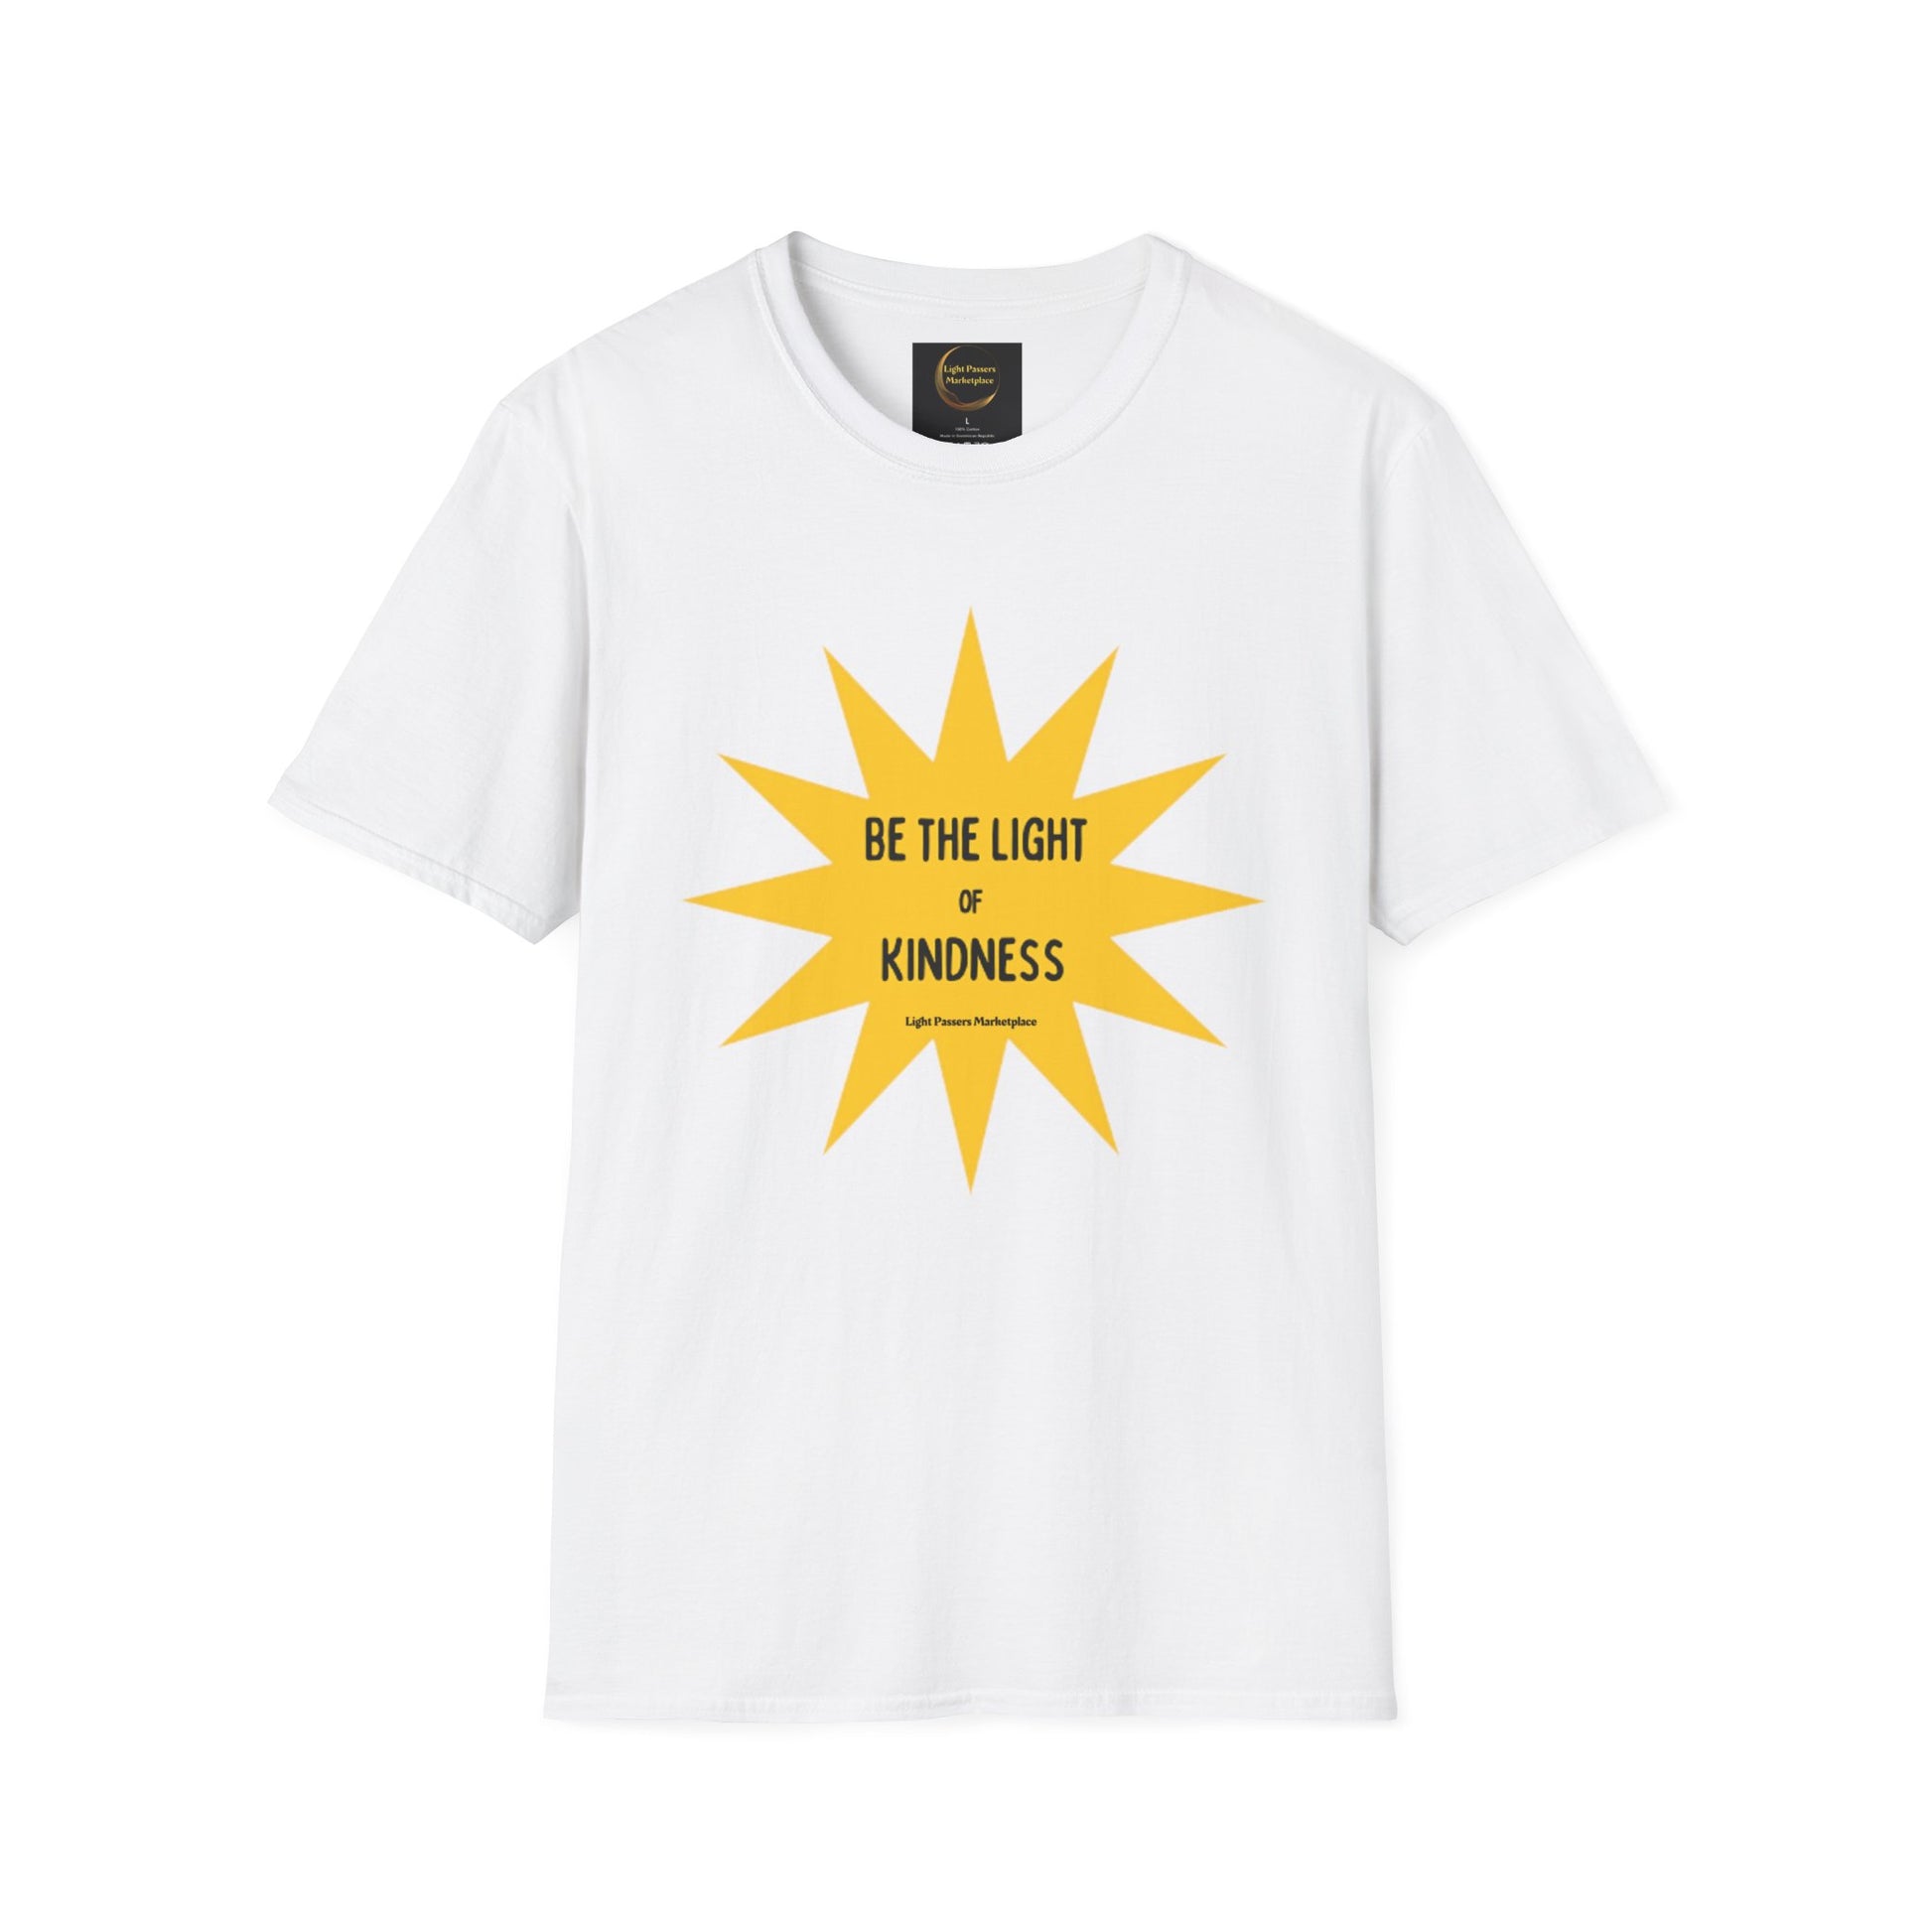 A unisex heavy cotton tee featuring a yellow star design and black text. Smooth surface for vivid printing, no side seams, and tape on shoulders for durability. 100% cotton. Classic fit.